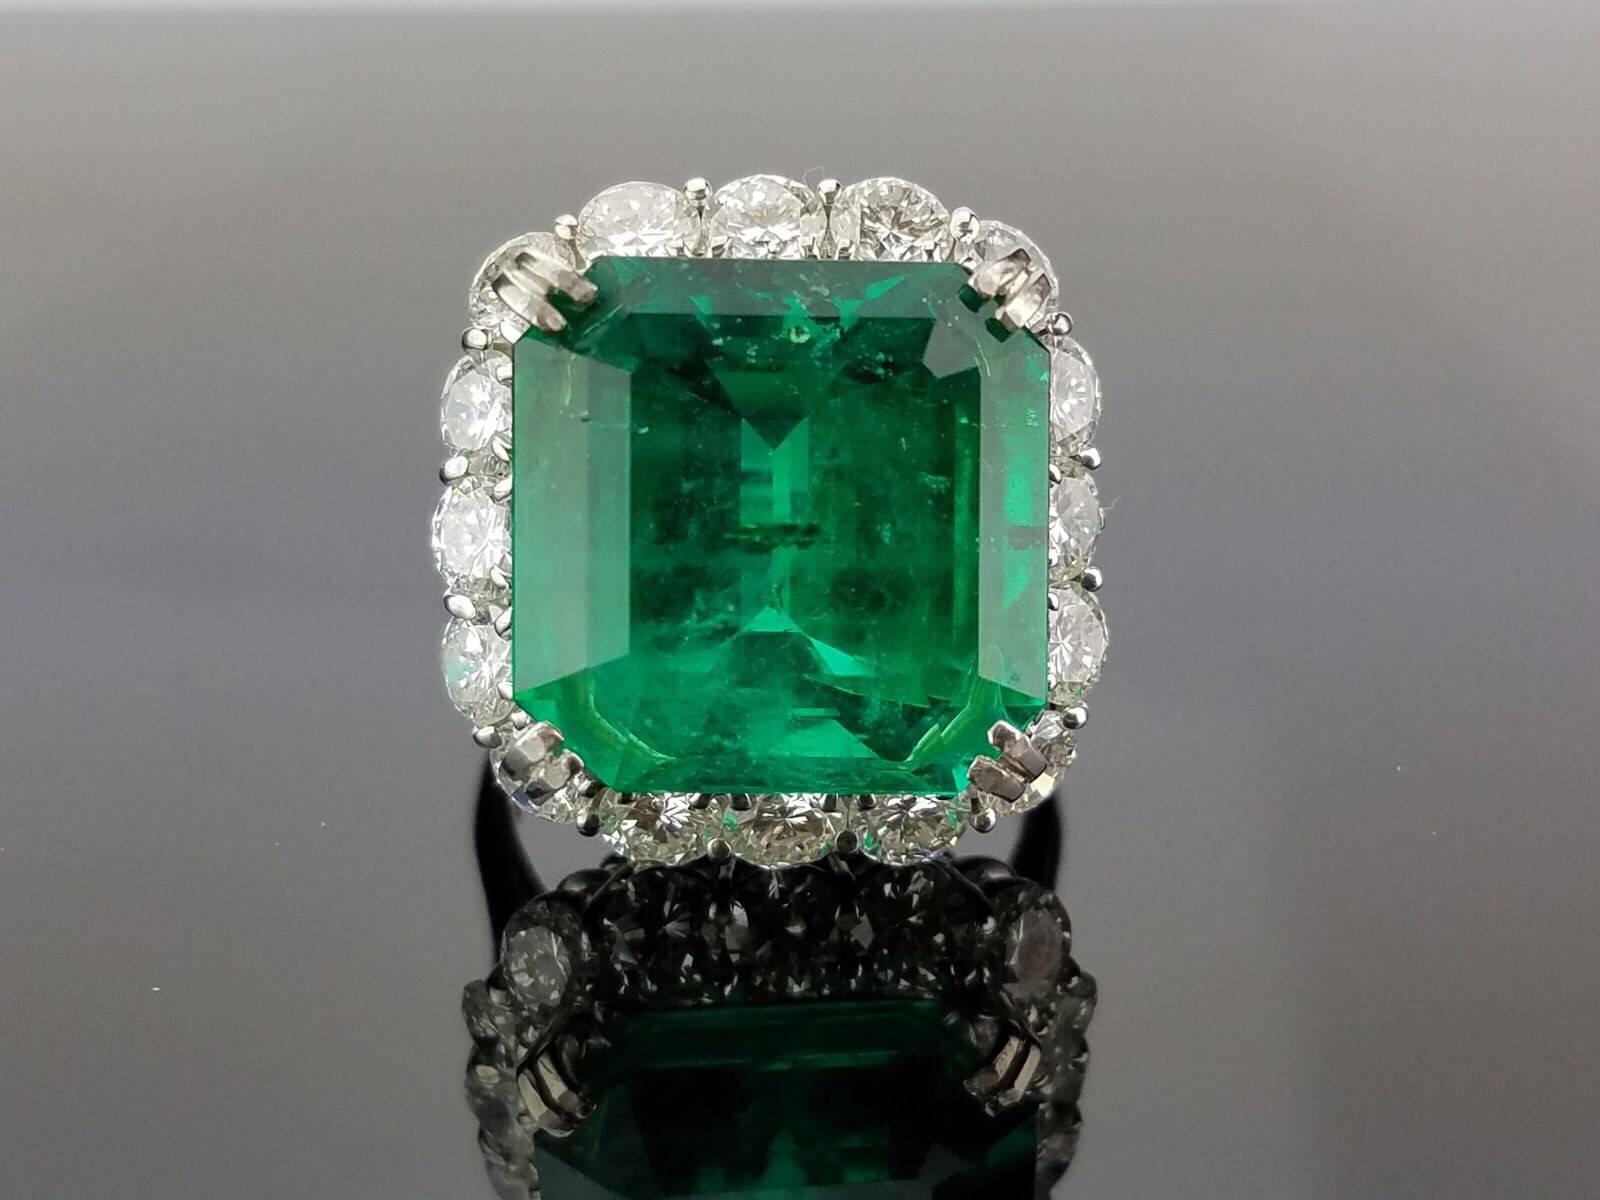 A high quality, lustrous emerald with very few inclusions and insignificant oil, and diamond (each piece weighing around just above 20 cents) cocktail ring, set in platinum.

Stone Details:  
Stone: Colombian Emerald
Cut: Emerald Cut
Carat Weight: